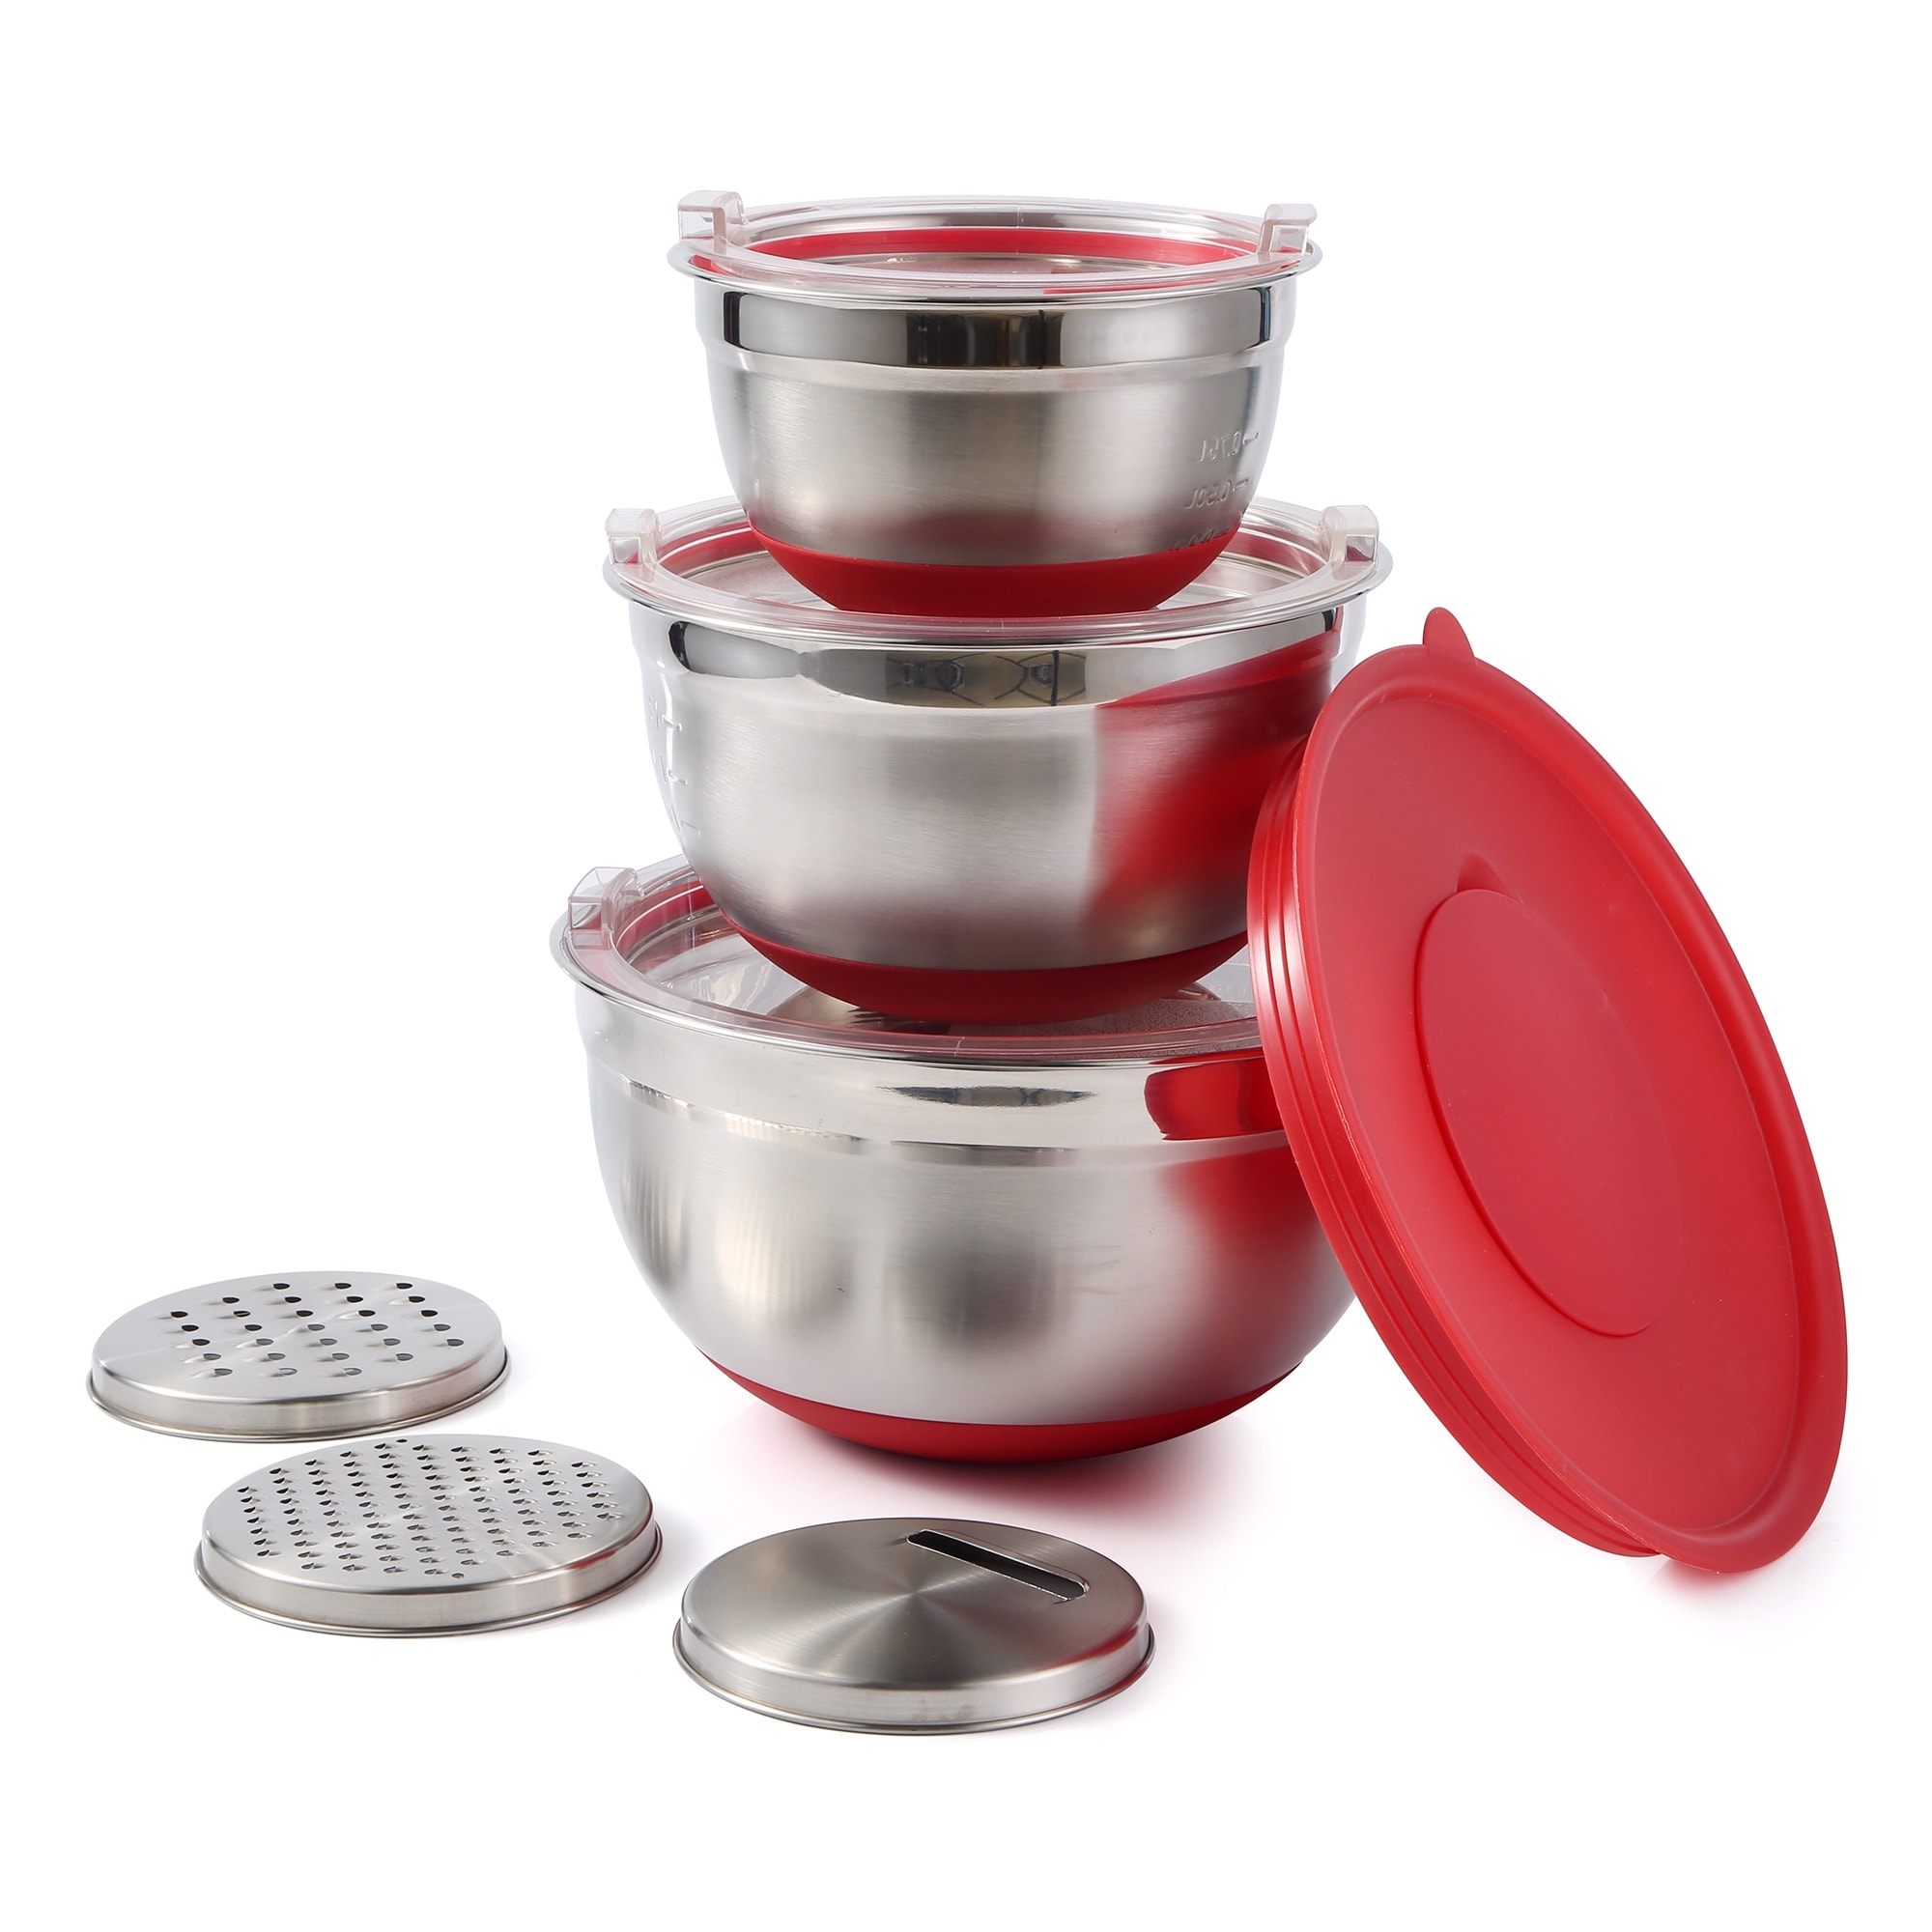 Viking 10 Piece Stainless Steel Mixing Bowl Set with Lids Red